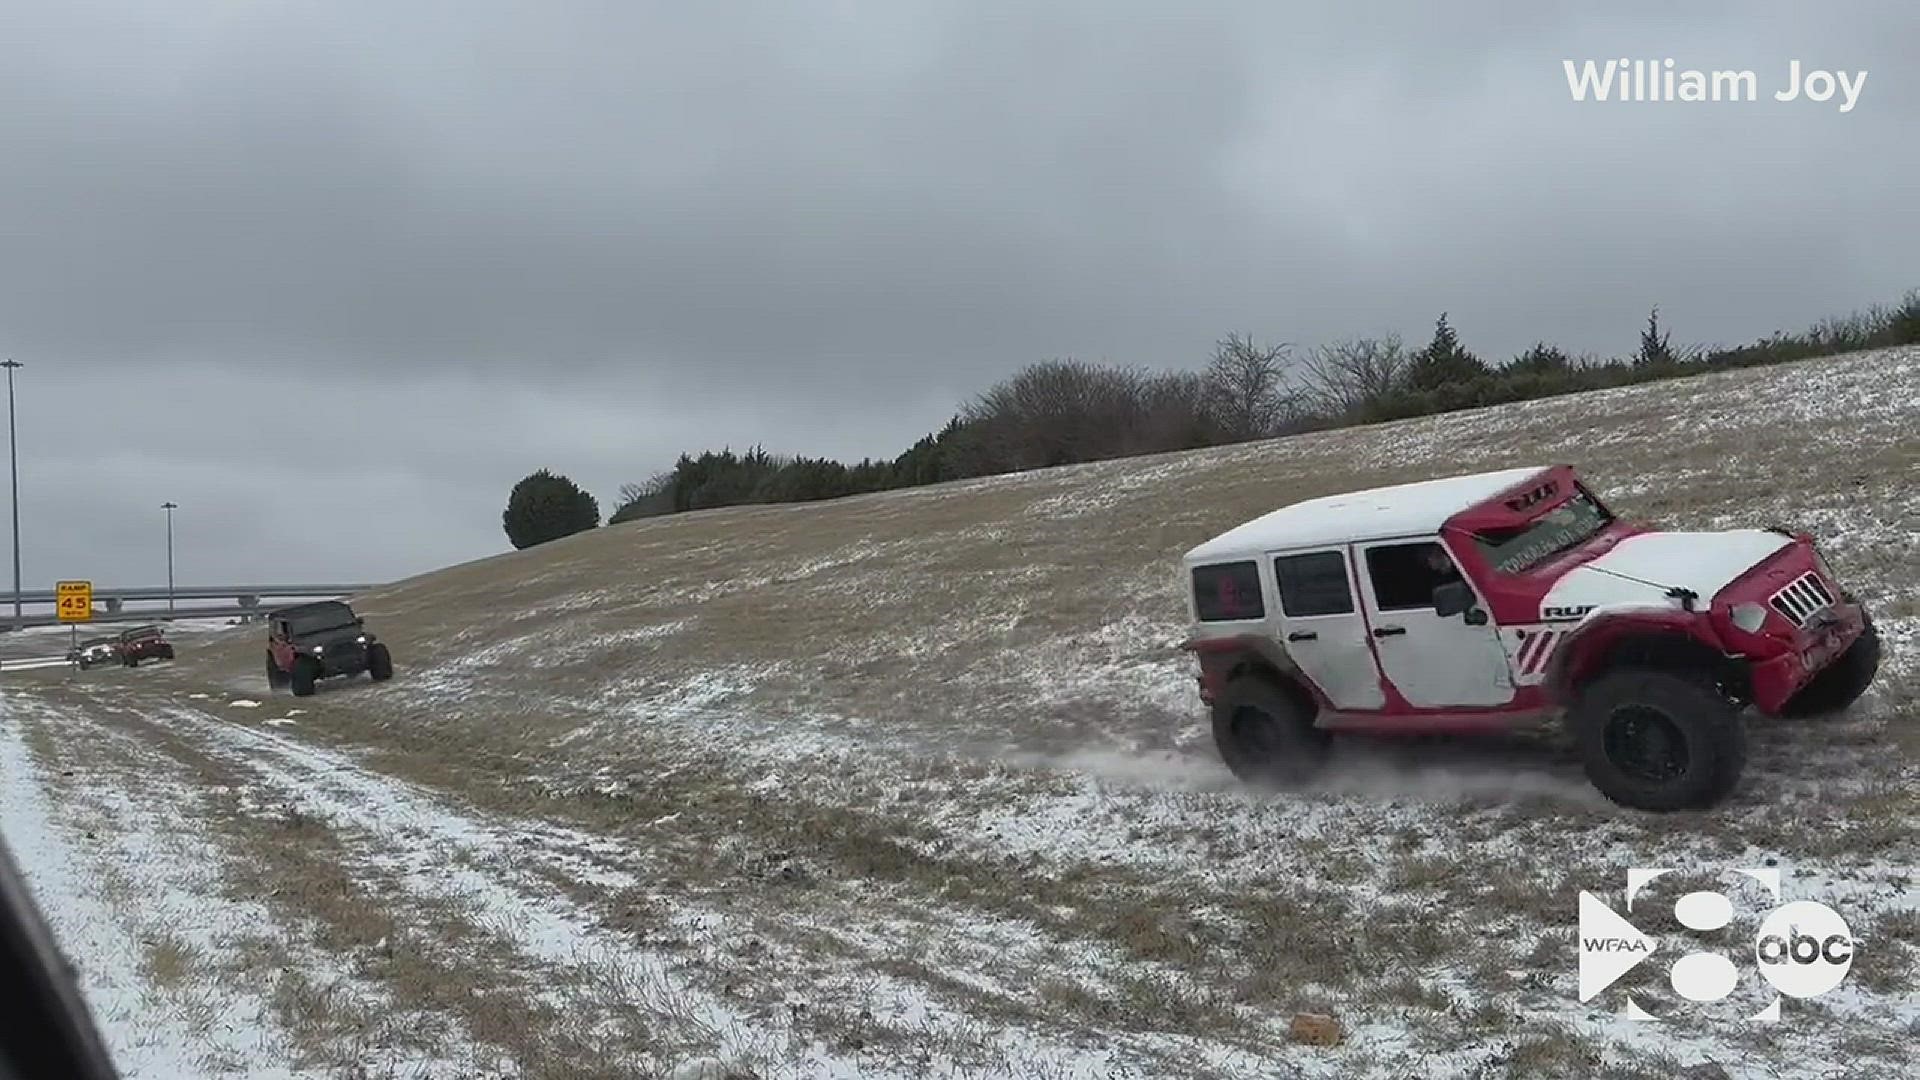 Drivers who were stuck on Interstate 20 in Dallas amid major ice issues got some help from a group of Jeeps that helped pull vehicles.